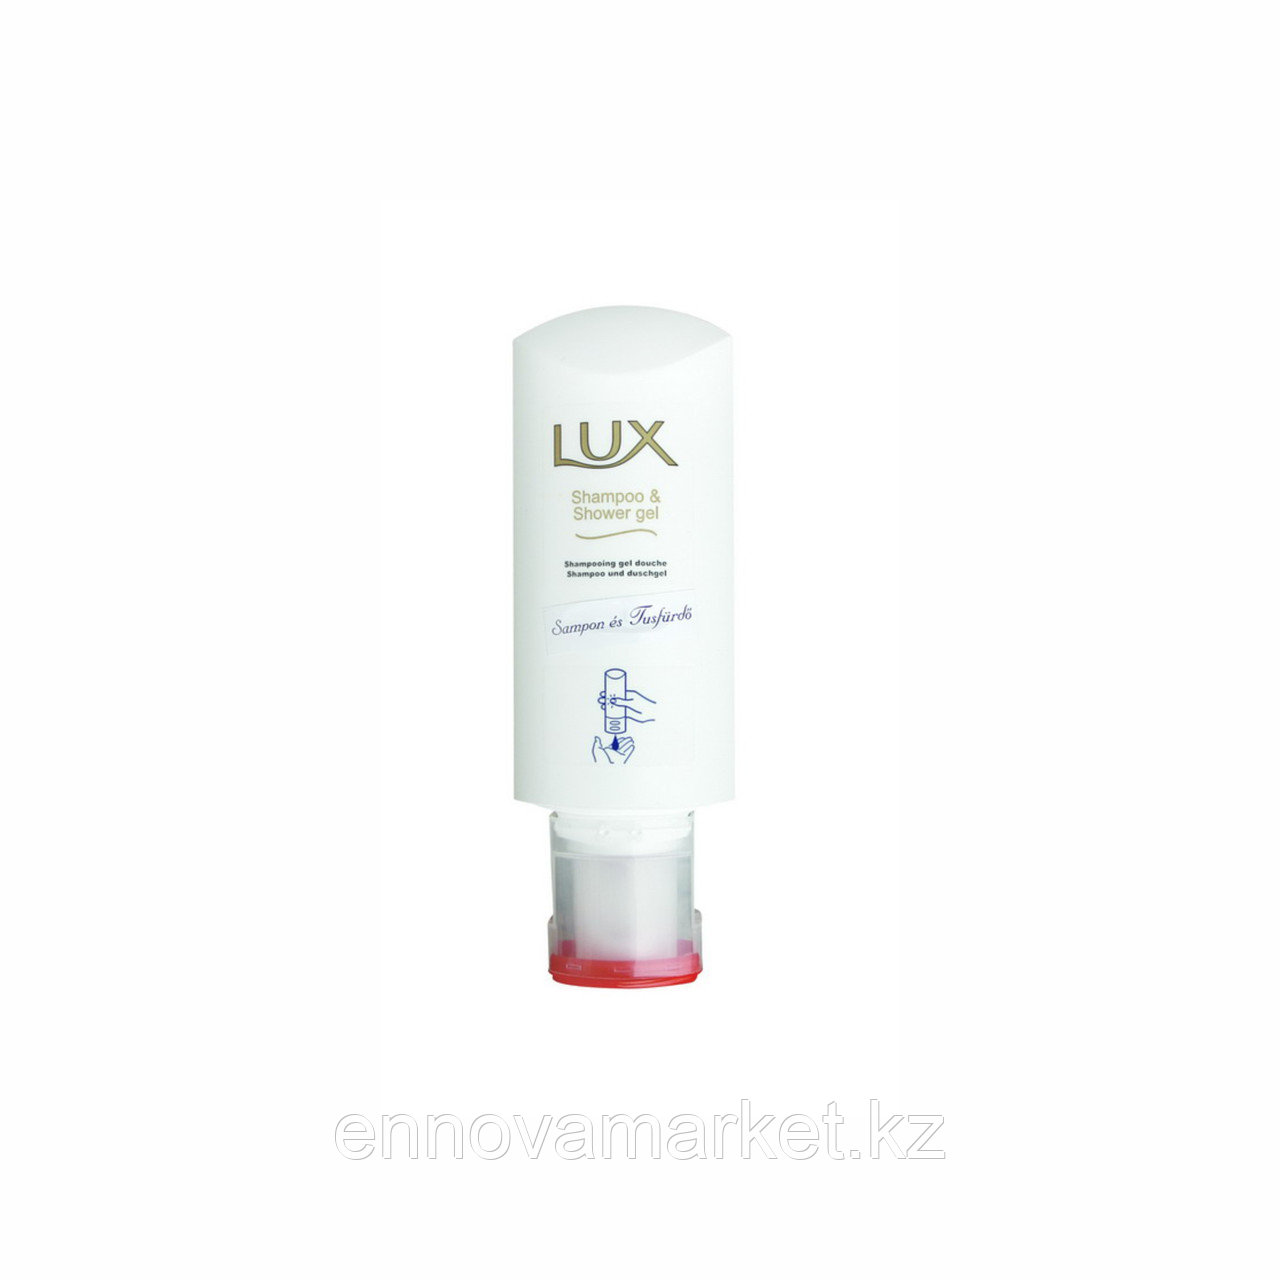 SOFTCARE SELECT LUX 2IN1 - фото 1 - id-p56164540